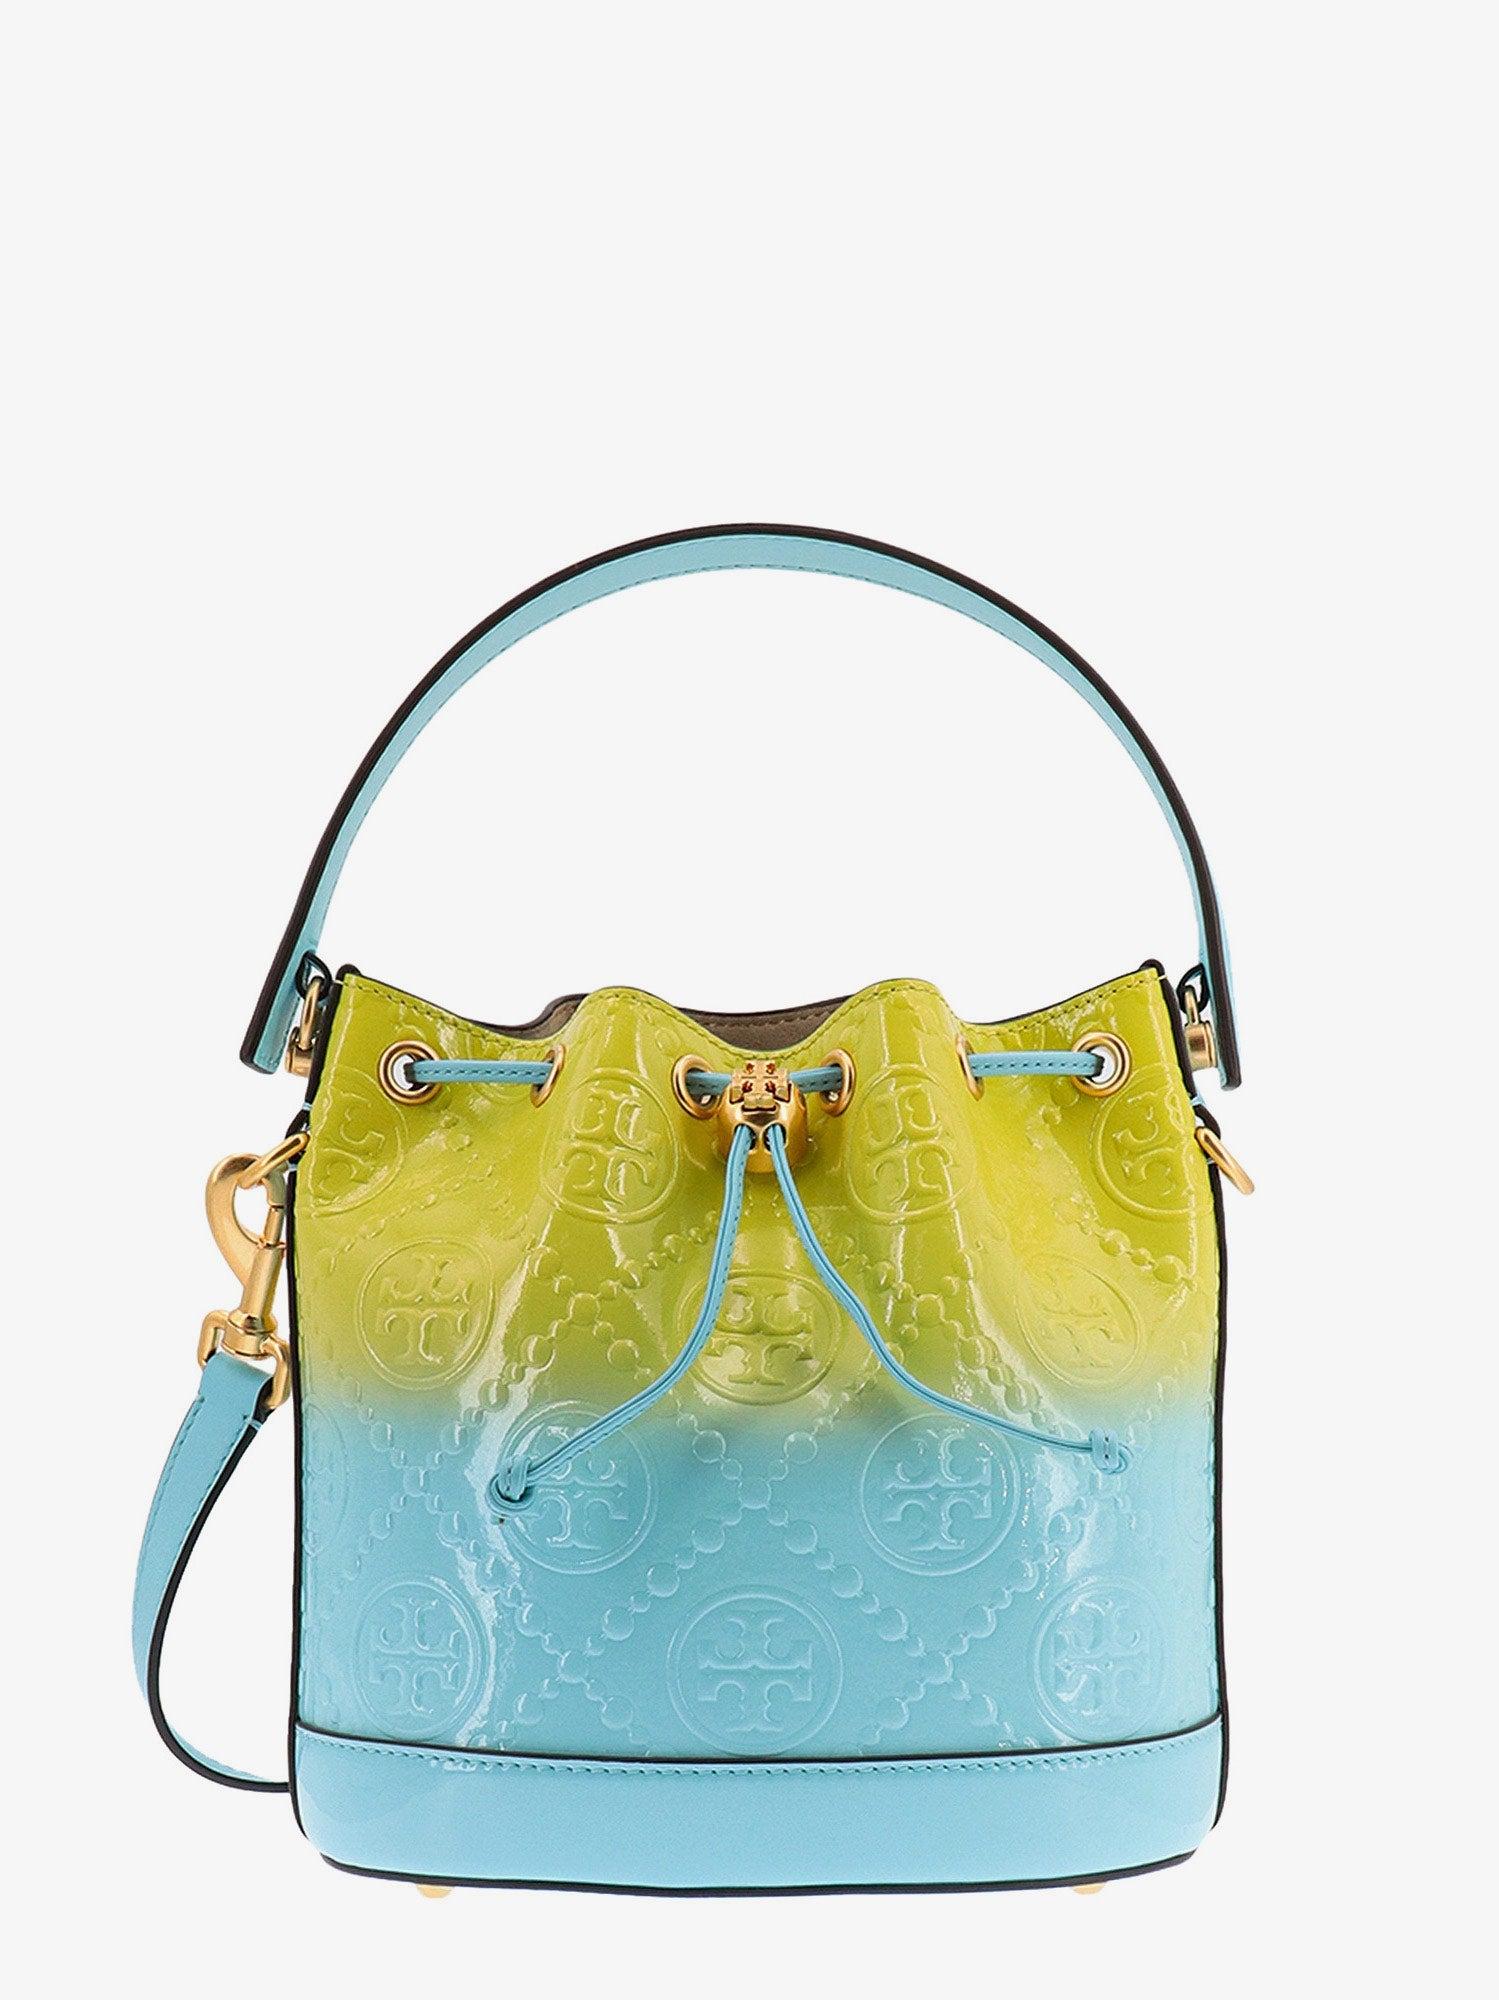 Tory Burch Leather Bucket Bags in Blue | Lyst UK